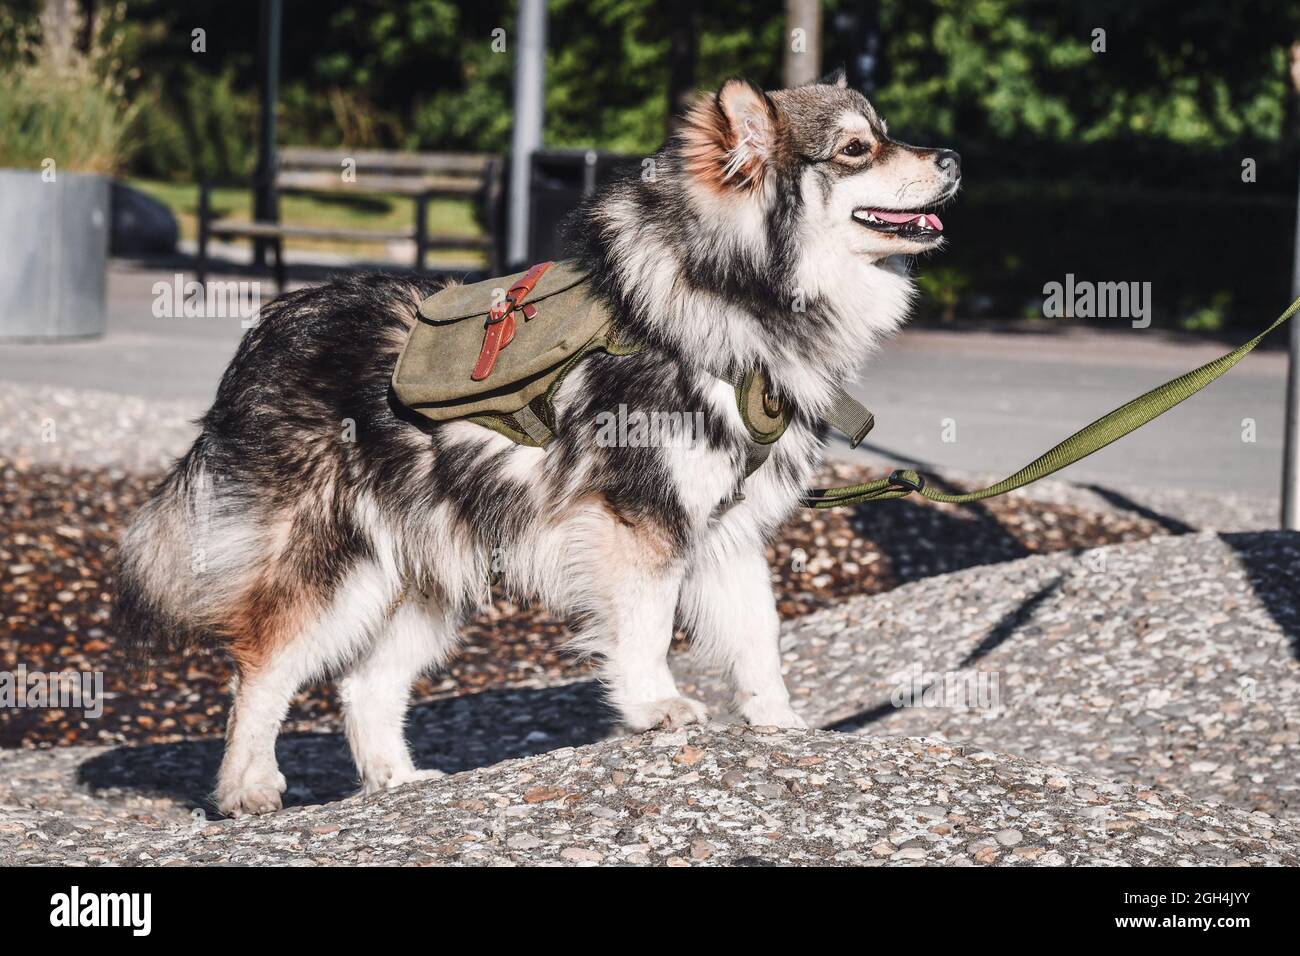 Portrait of a purebred Finnish Lapphund dog wearing a backpack in the city Stock Photo